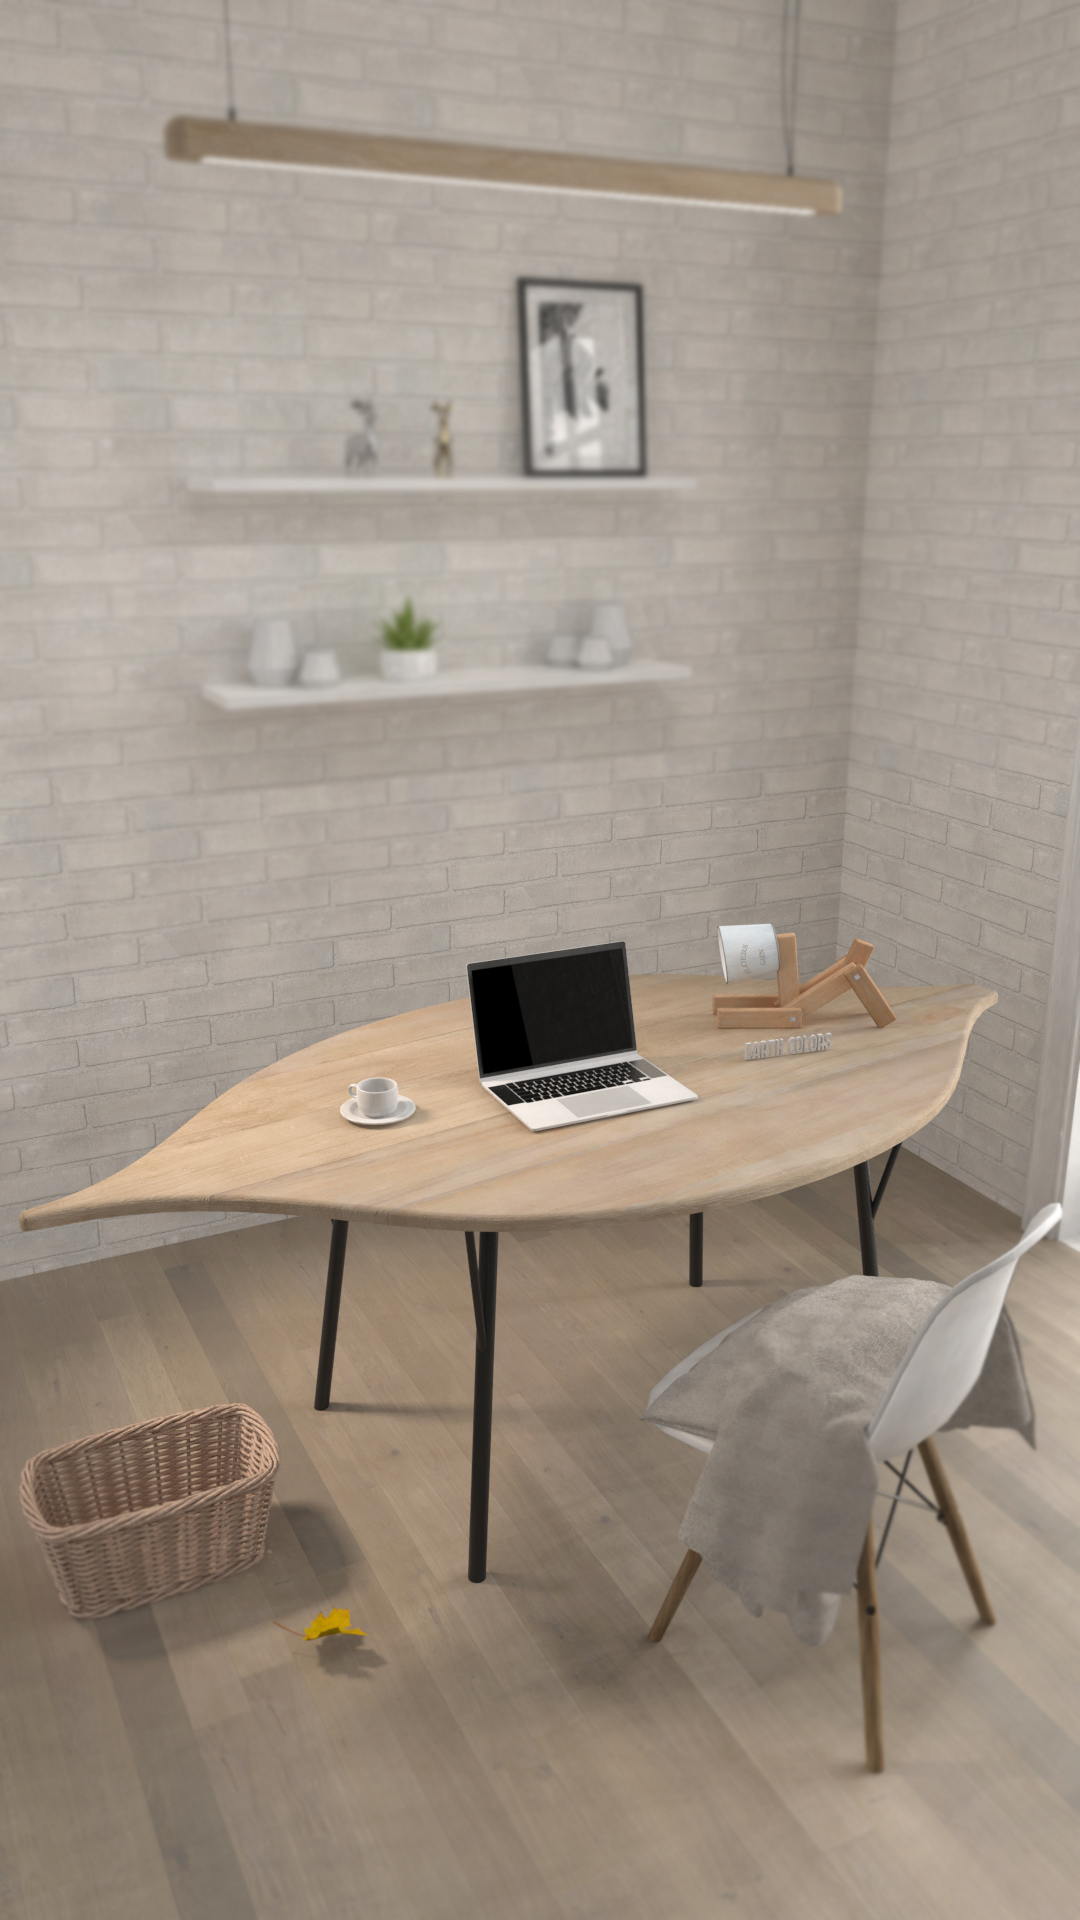 Desk with shelves above